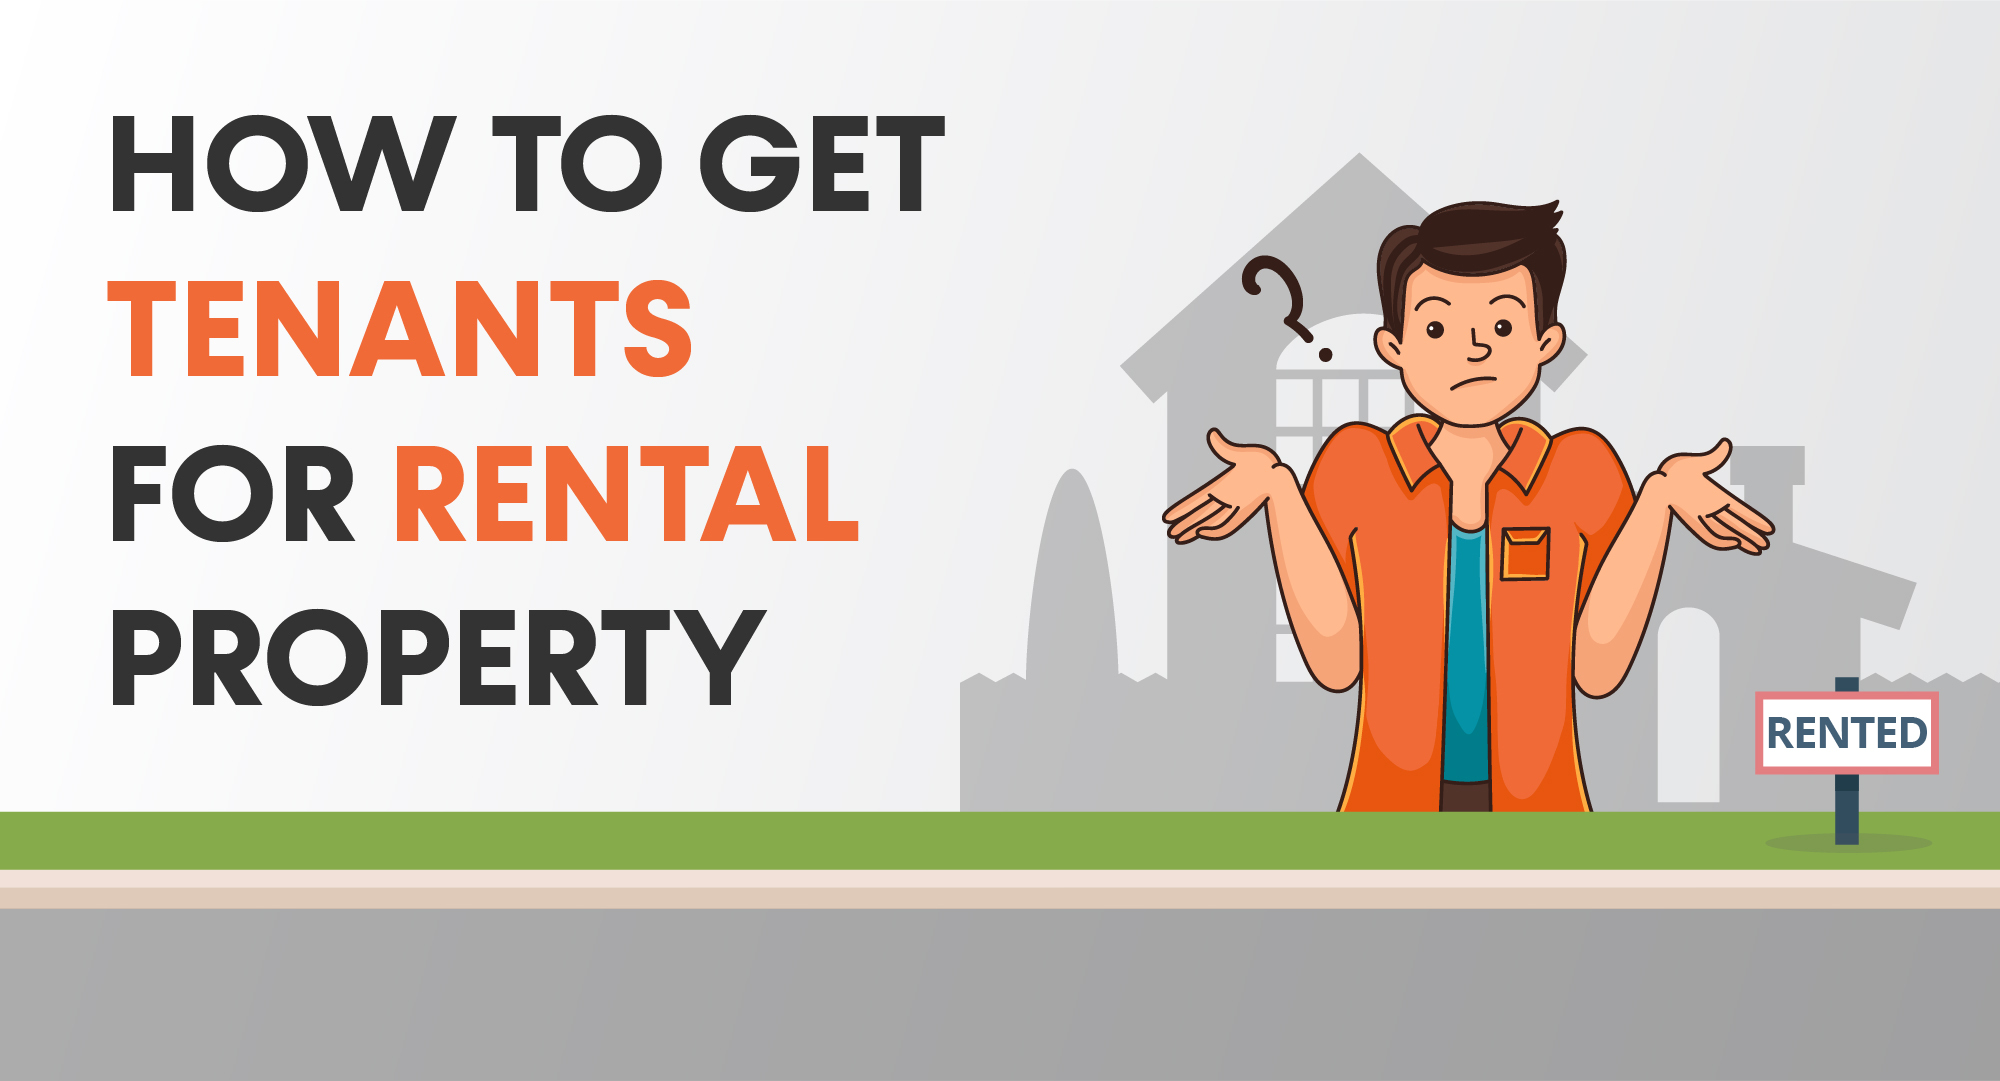 How to get tenants for rental property